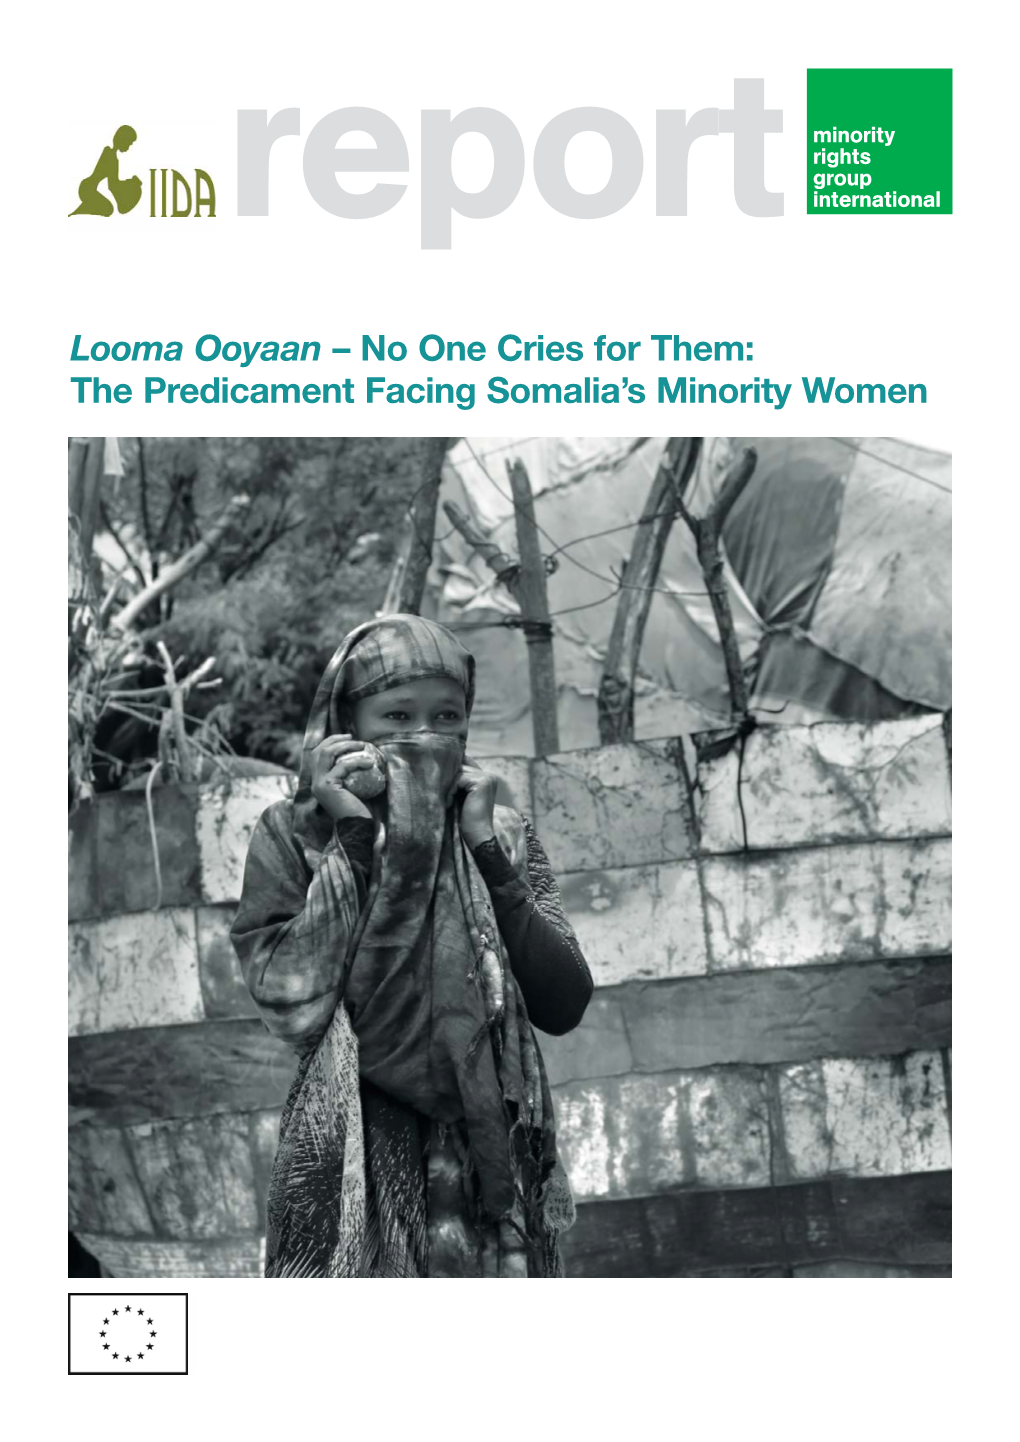 Looma Ooyaan – No One Cries for Them: the Predicament Facing Somalia’S Minority Women Gaboye Woman, Somaliland, 2014